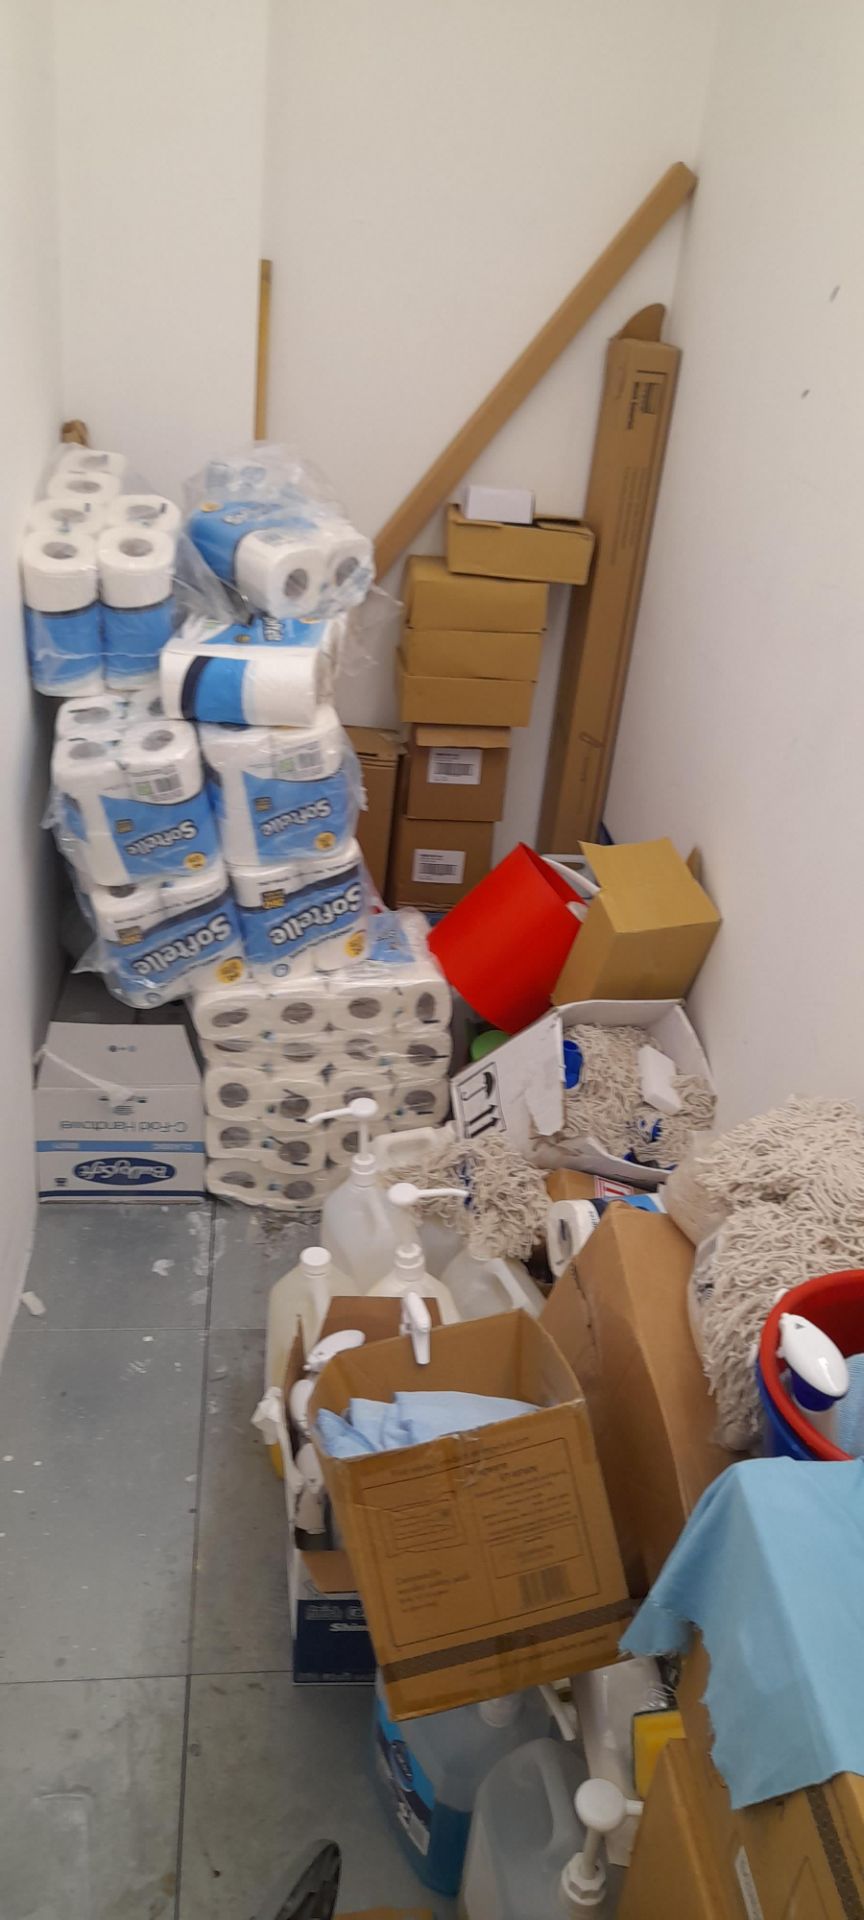 Quantity of toilet paper & cleaning consumables to room including hose, bucket & mop